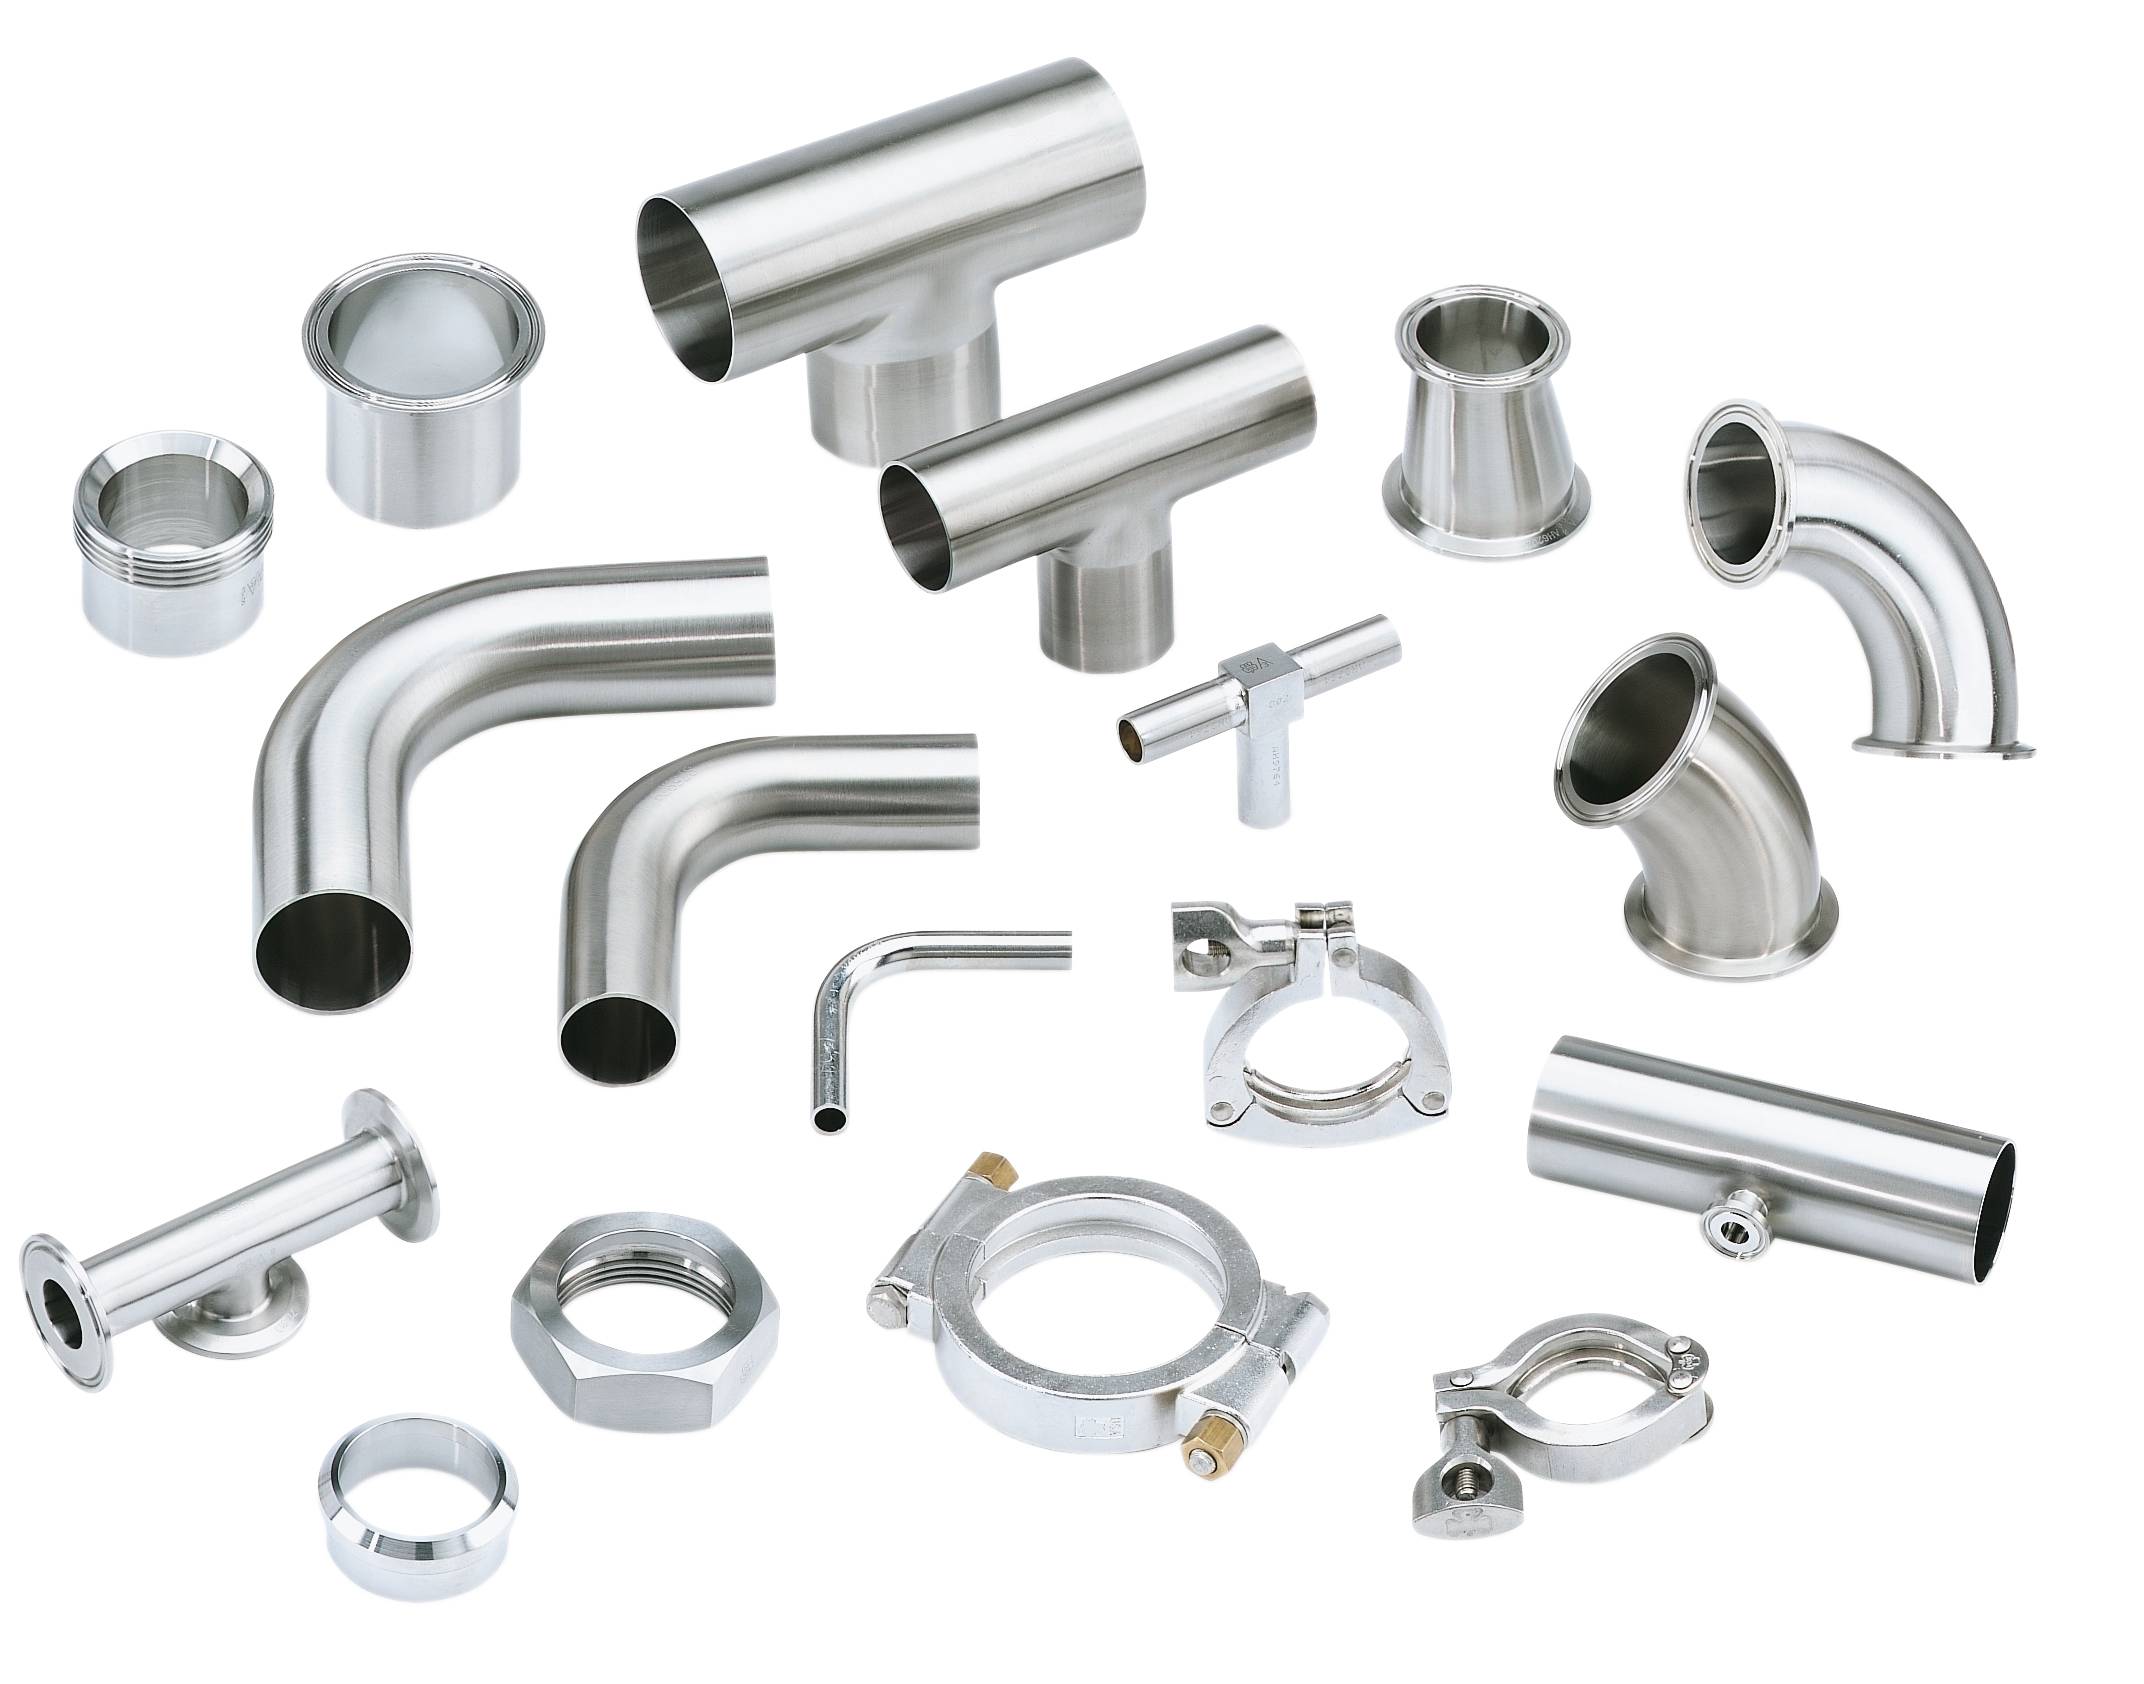 An Overview On Brazing Of Stainless Steel Components